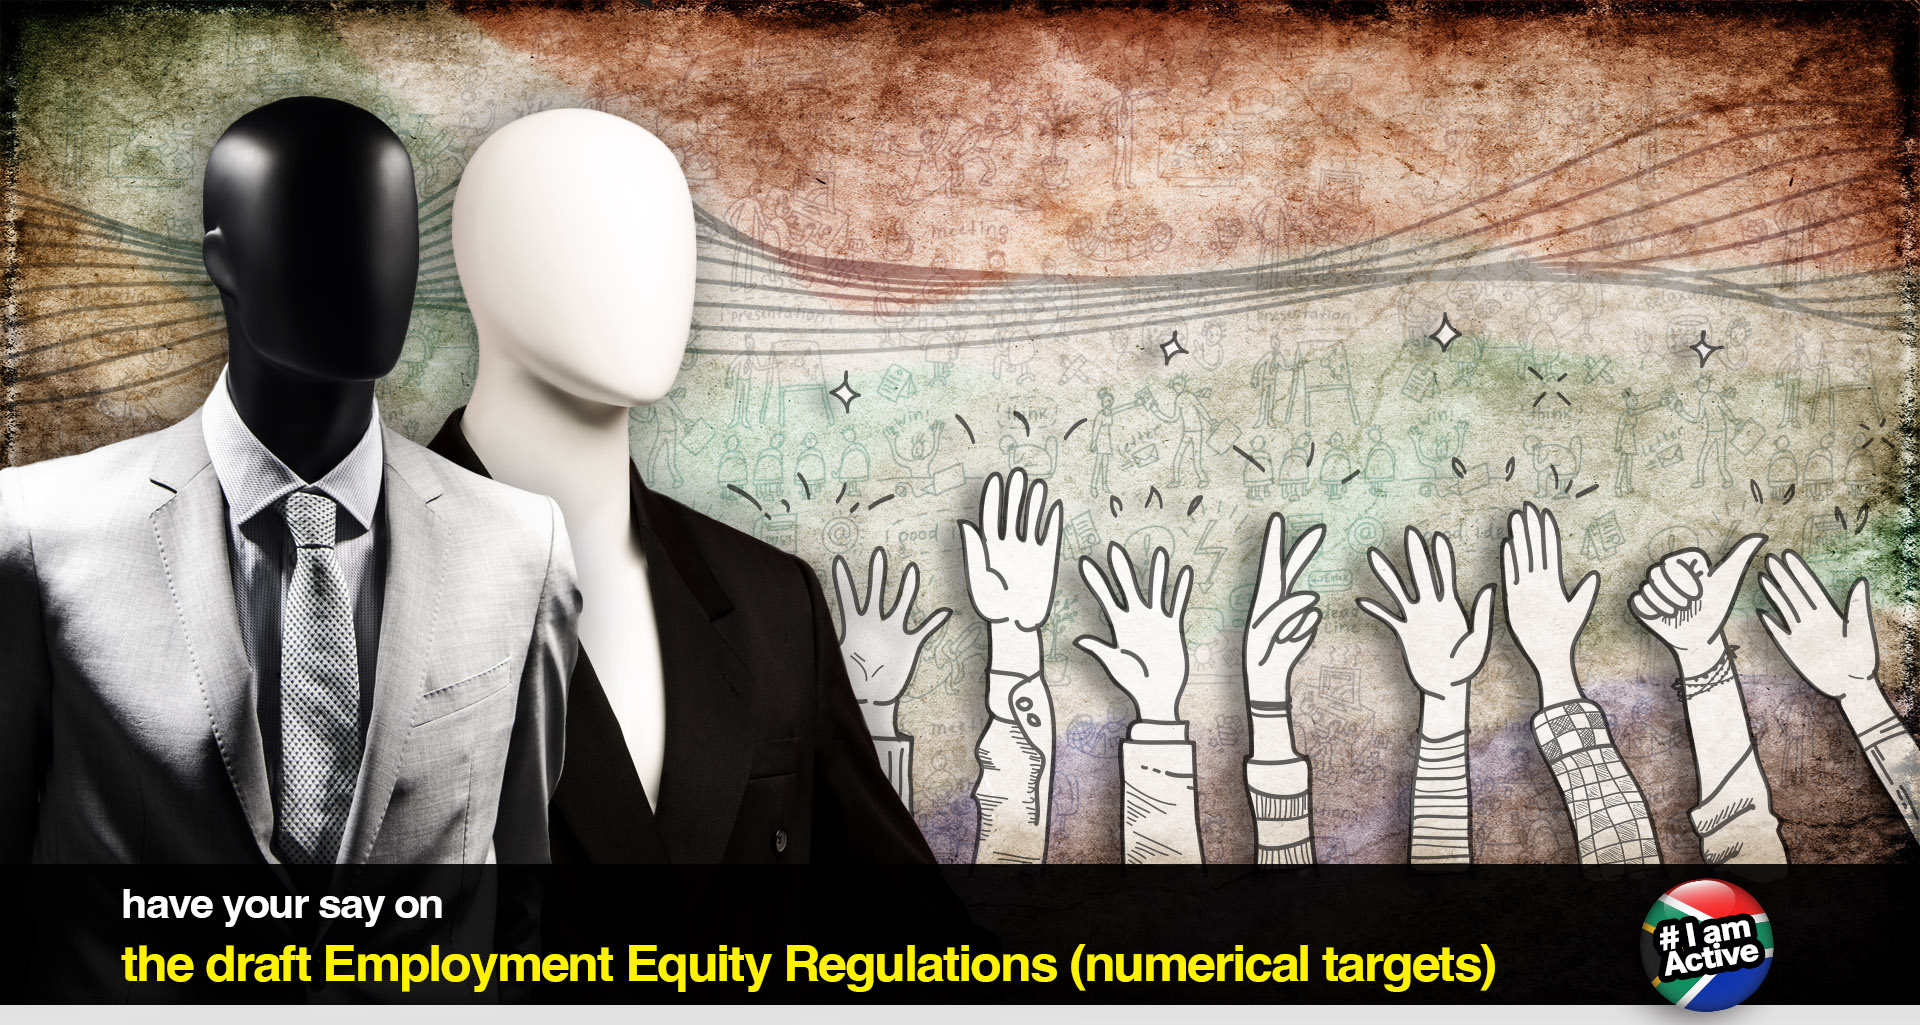 Have a say on the Draft Employment Equity Regulations